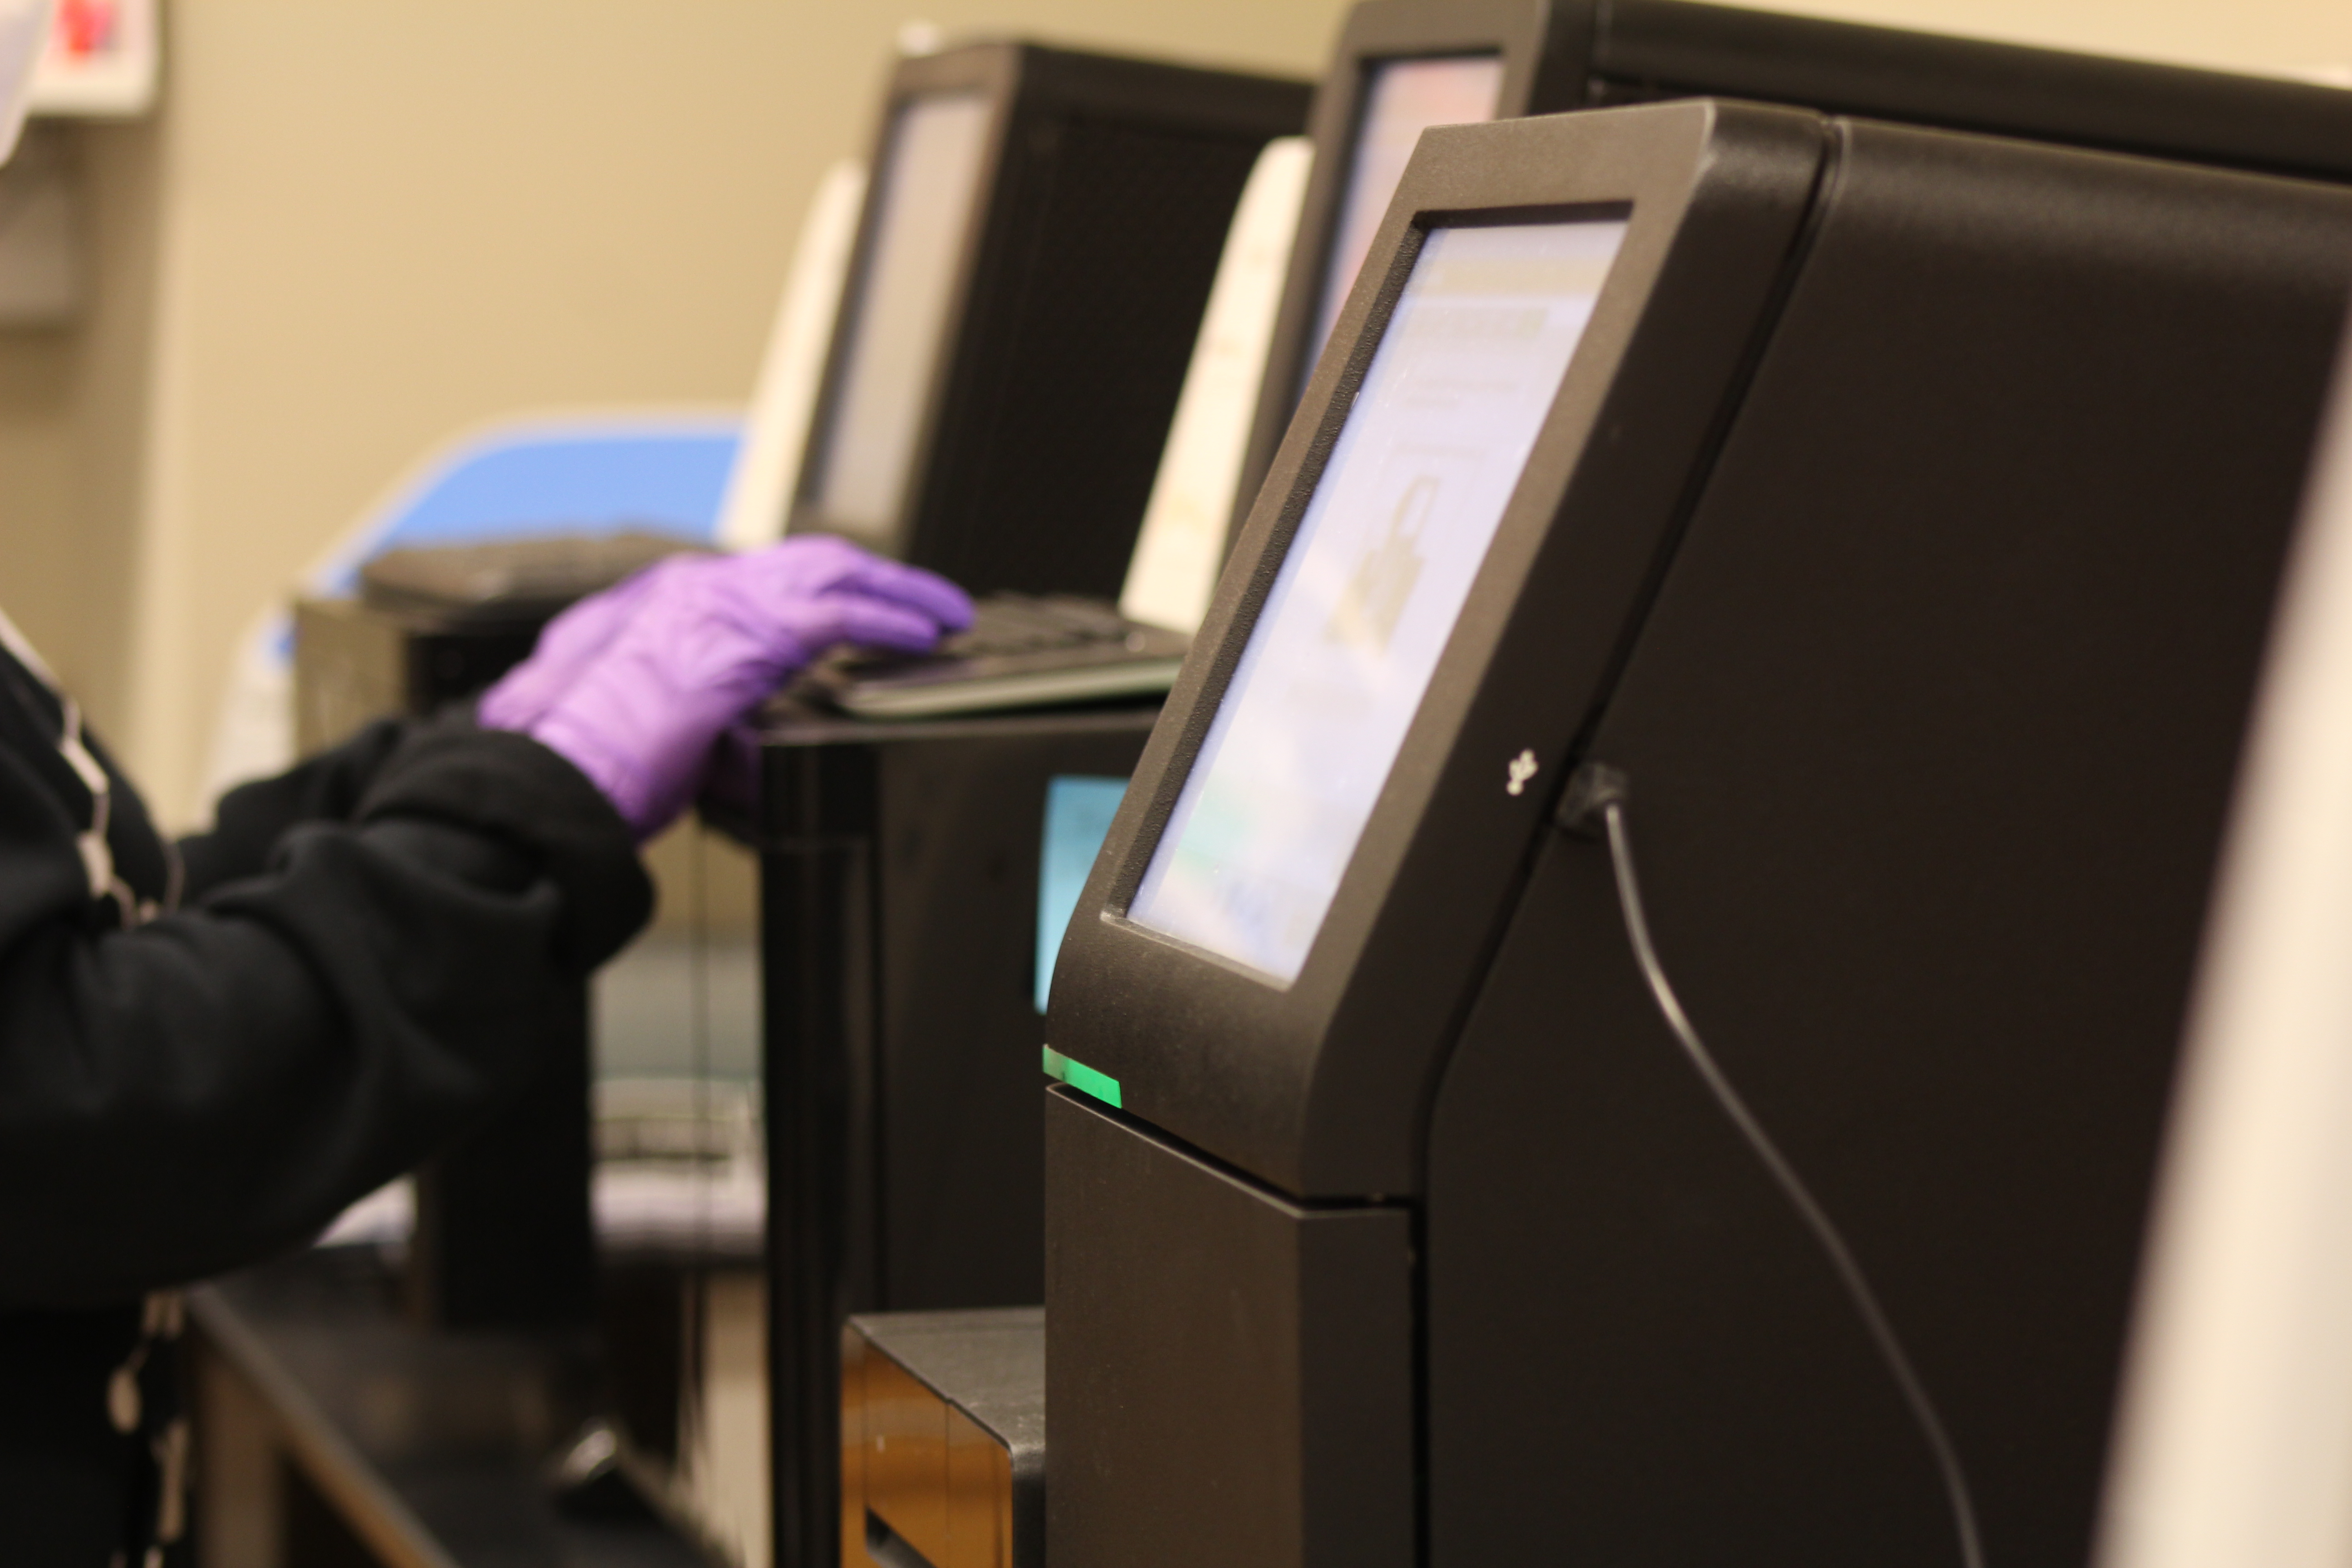 The Core provides access to many Illumina short read sequencers, including the NovaSeq 6000, NextSeq 500, MiSeq and iSeq, ensuring services can meet the needs of a wide variety of projects at the lowest cost.